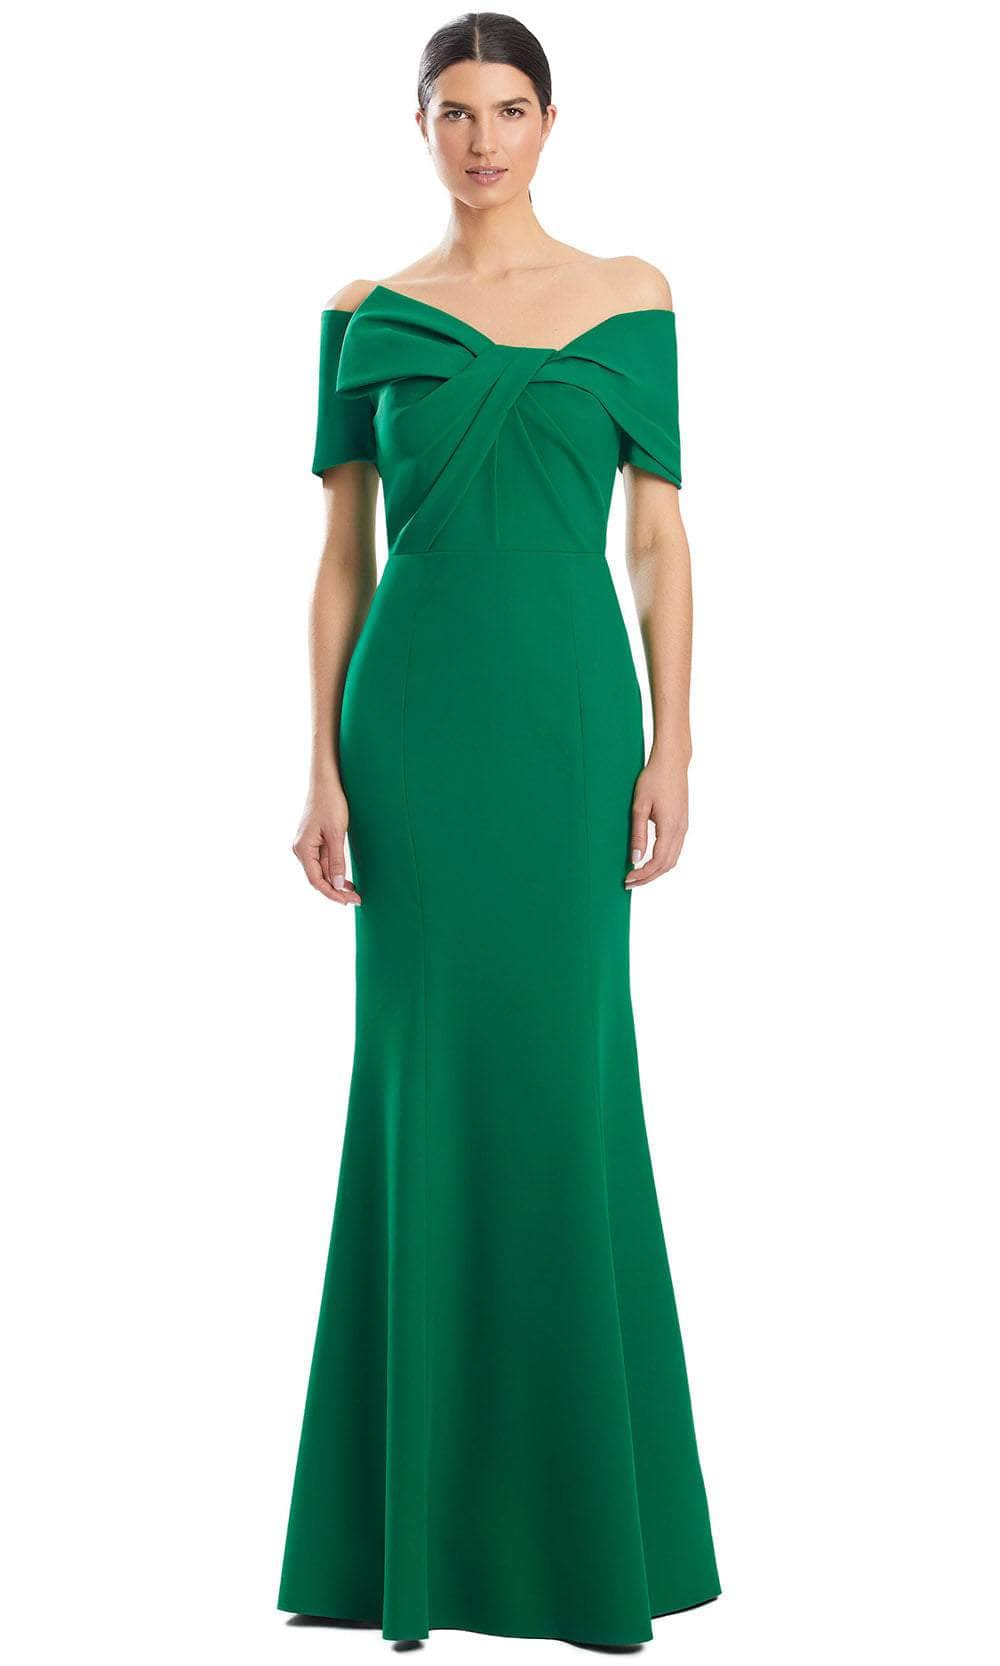 Alexander by Daymor 1954S24 - Short Sleeve Fitted Evening Dress Mother of the Bride Dresses 4 /  Emerald